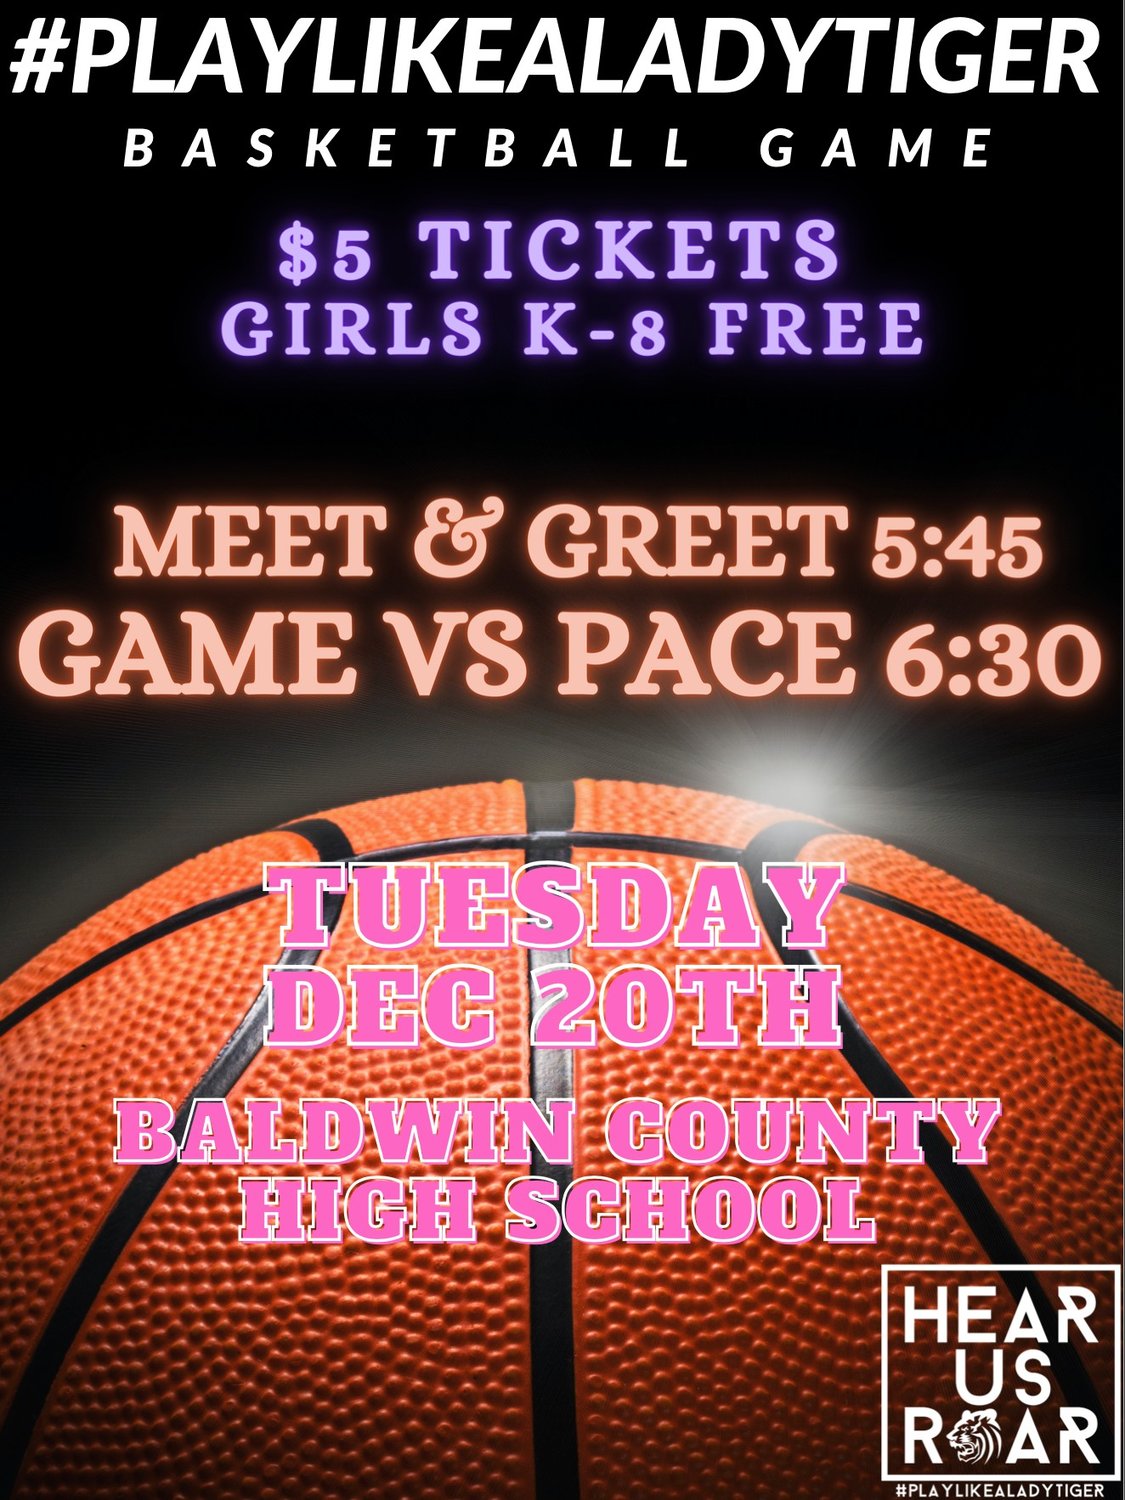 Baldwin County High School is hosting a Play Like a Lady Tiger showcase before tonight’s girls’ basketball game against Pace. Future female student-athletes have the opportunity to meet and talk with current Lady Tigers at 5:45 p.m. before the 6:30 p.m. tipoff.